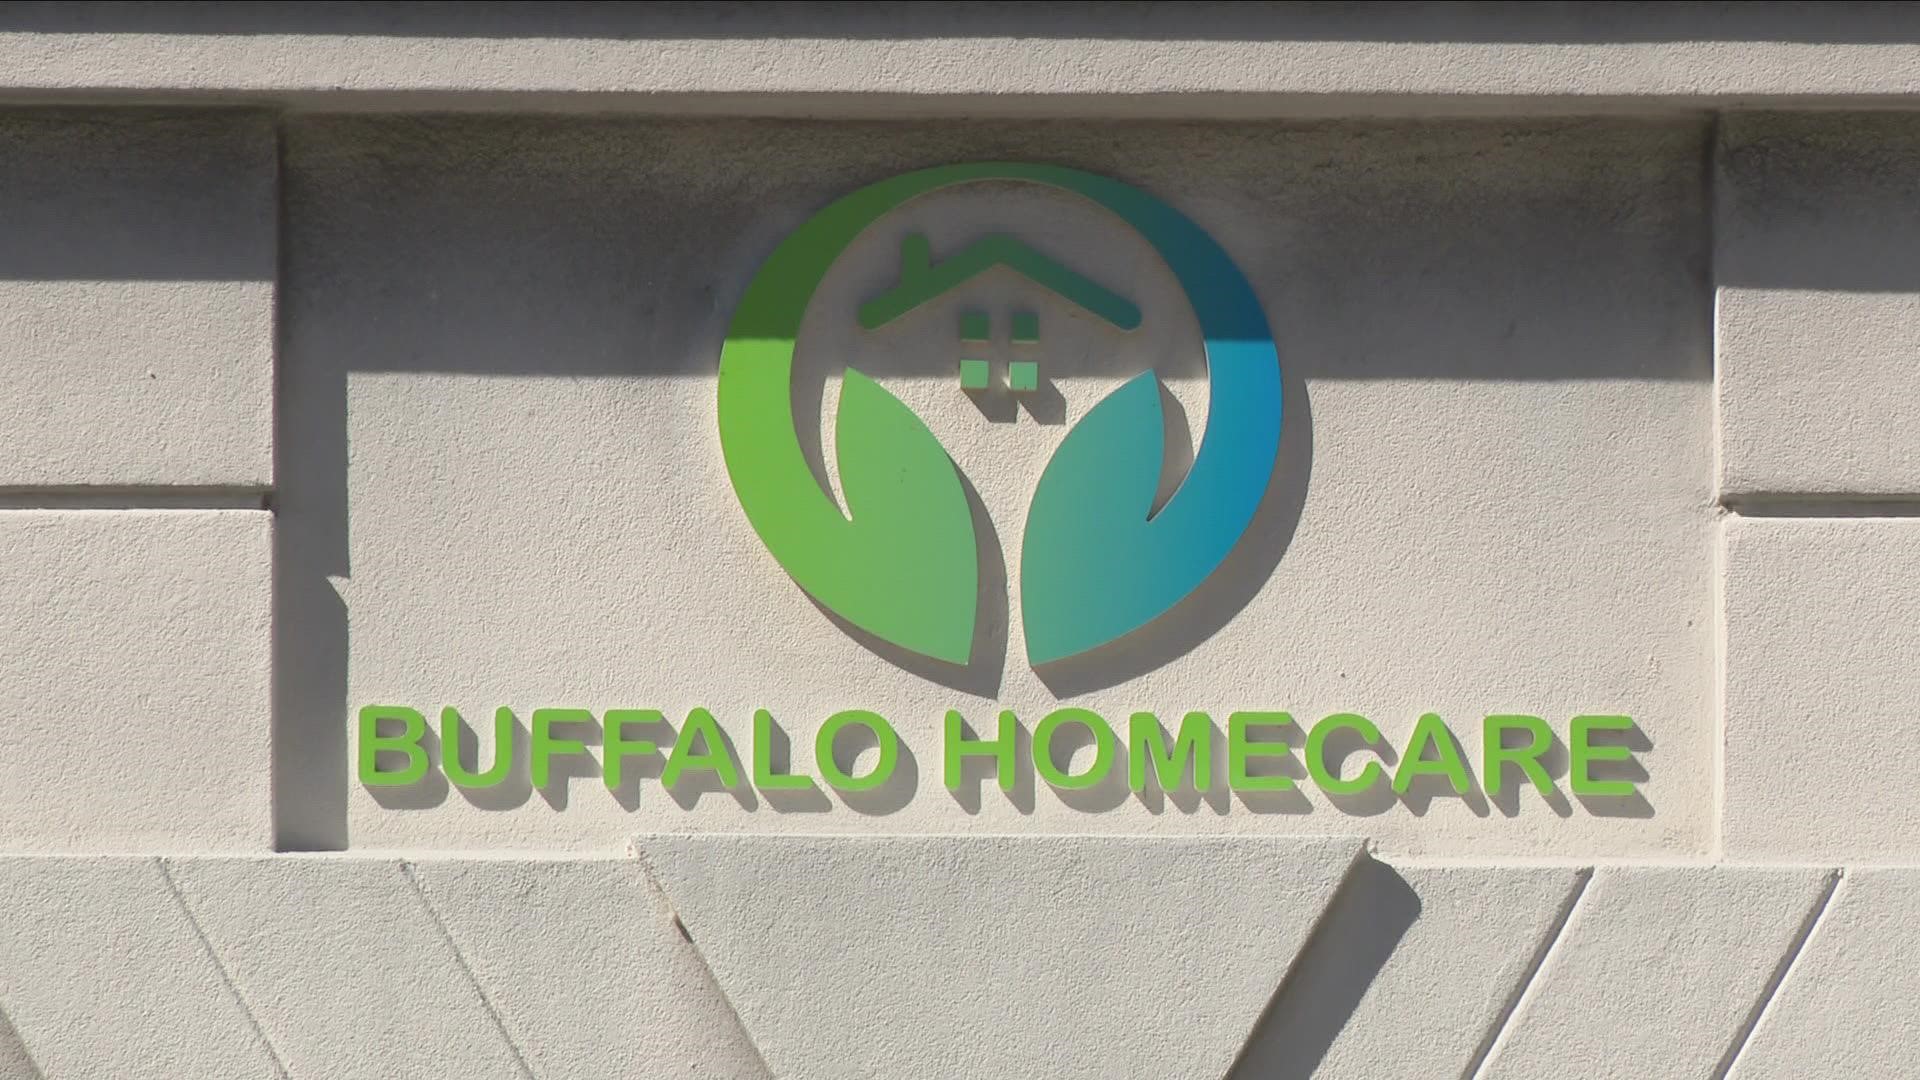 Last year, Buffalo Homecare was hired to administer shots and a test to stay program for school children.  They may have overcharged the county by $700,000.